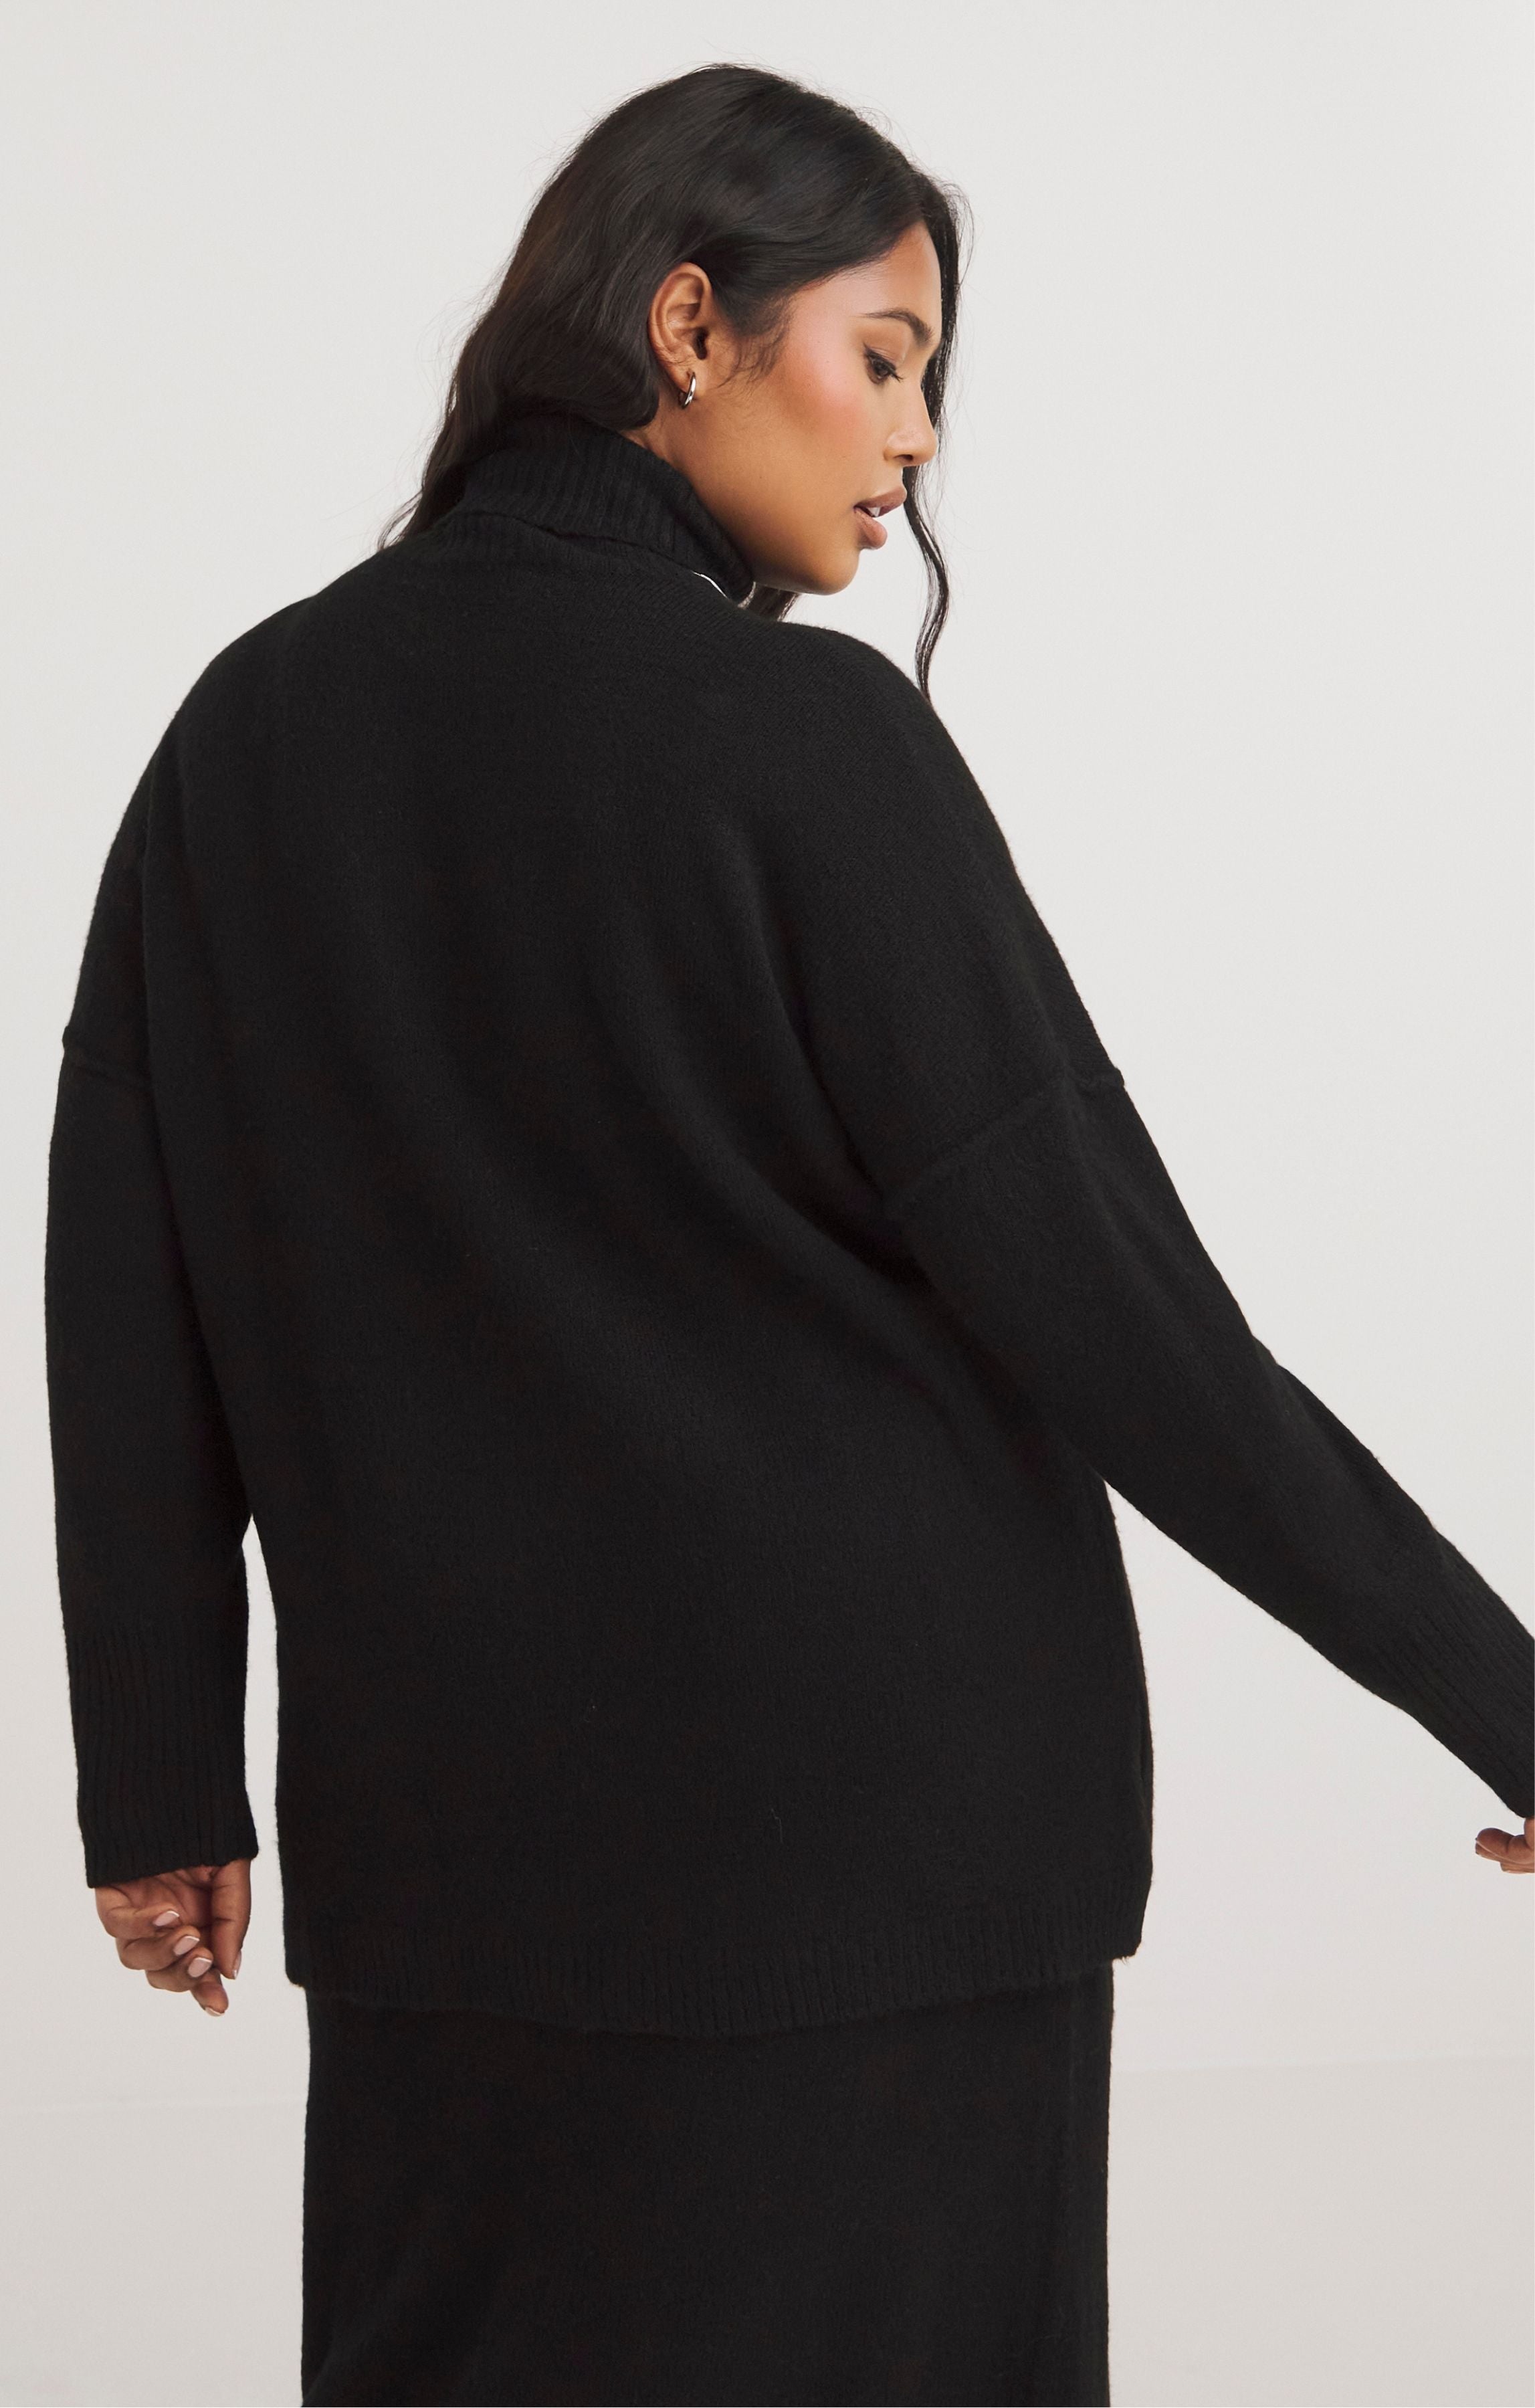 Simply Be Black Roll Neck Longline Jumper product image